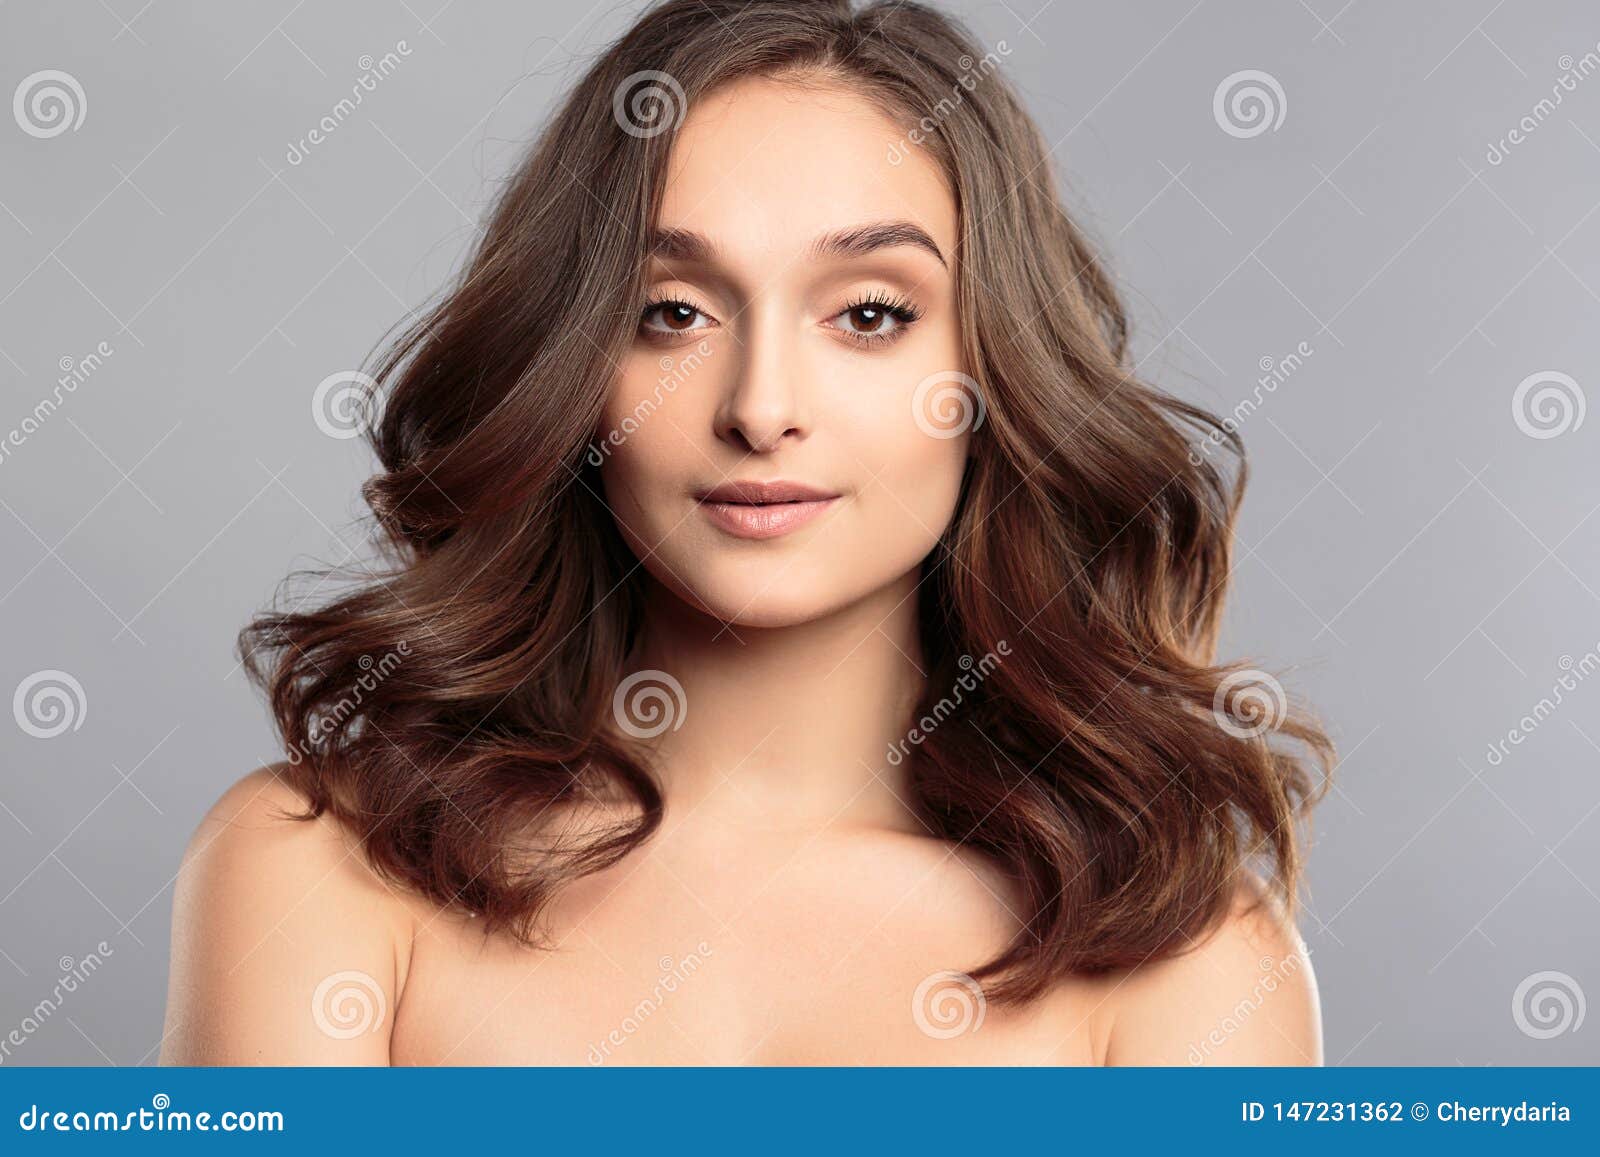 Brunette Girl with Healthy Curly Hair and Natural Make Up . Beautiful Model  Woman with Wavy Hairstyle Stock Photo - Image of haircut, healthy: 147231362